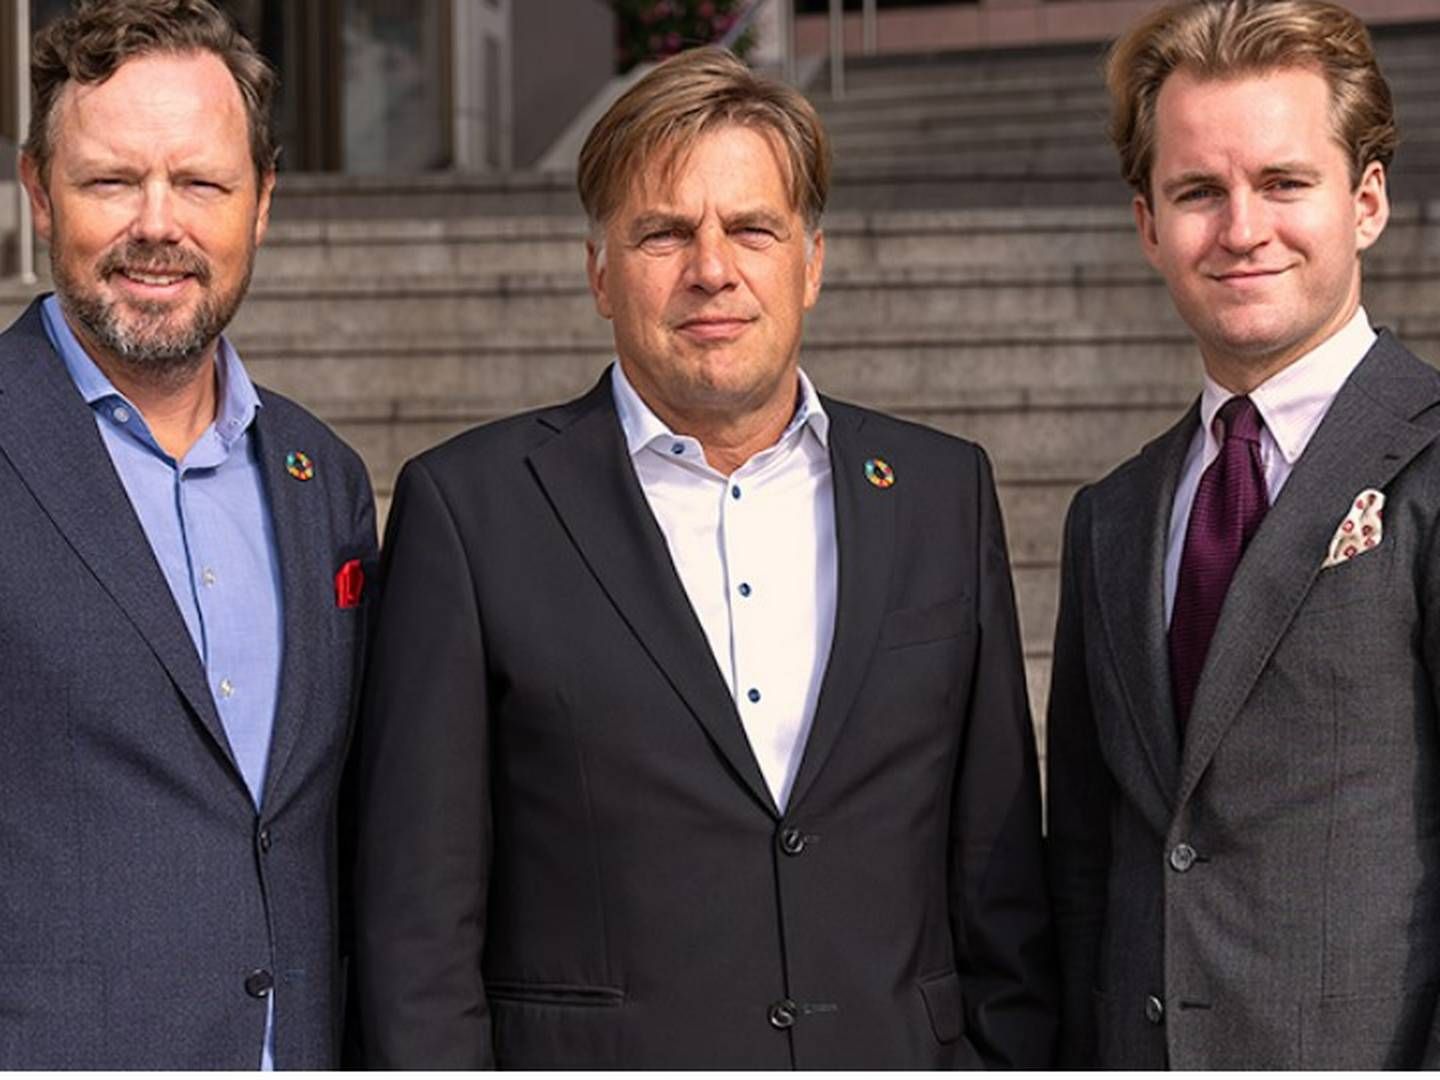 From left: The portfolio managers Joakim By, Christoffer Halldin and Simon Park who were all poached from Handelsbanken Fonder last year to take charge of Coeli's sustainable "Circulus" strategy. | Foto: PR/Coeli